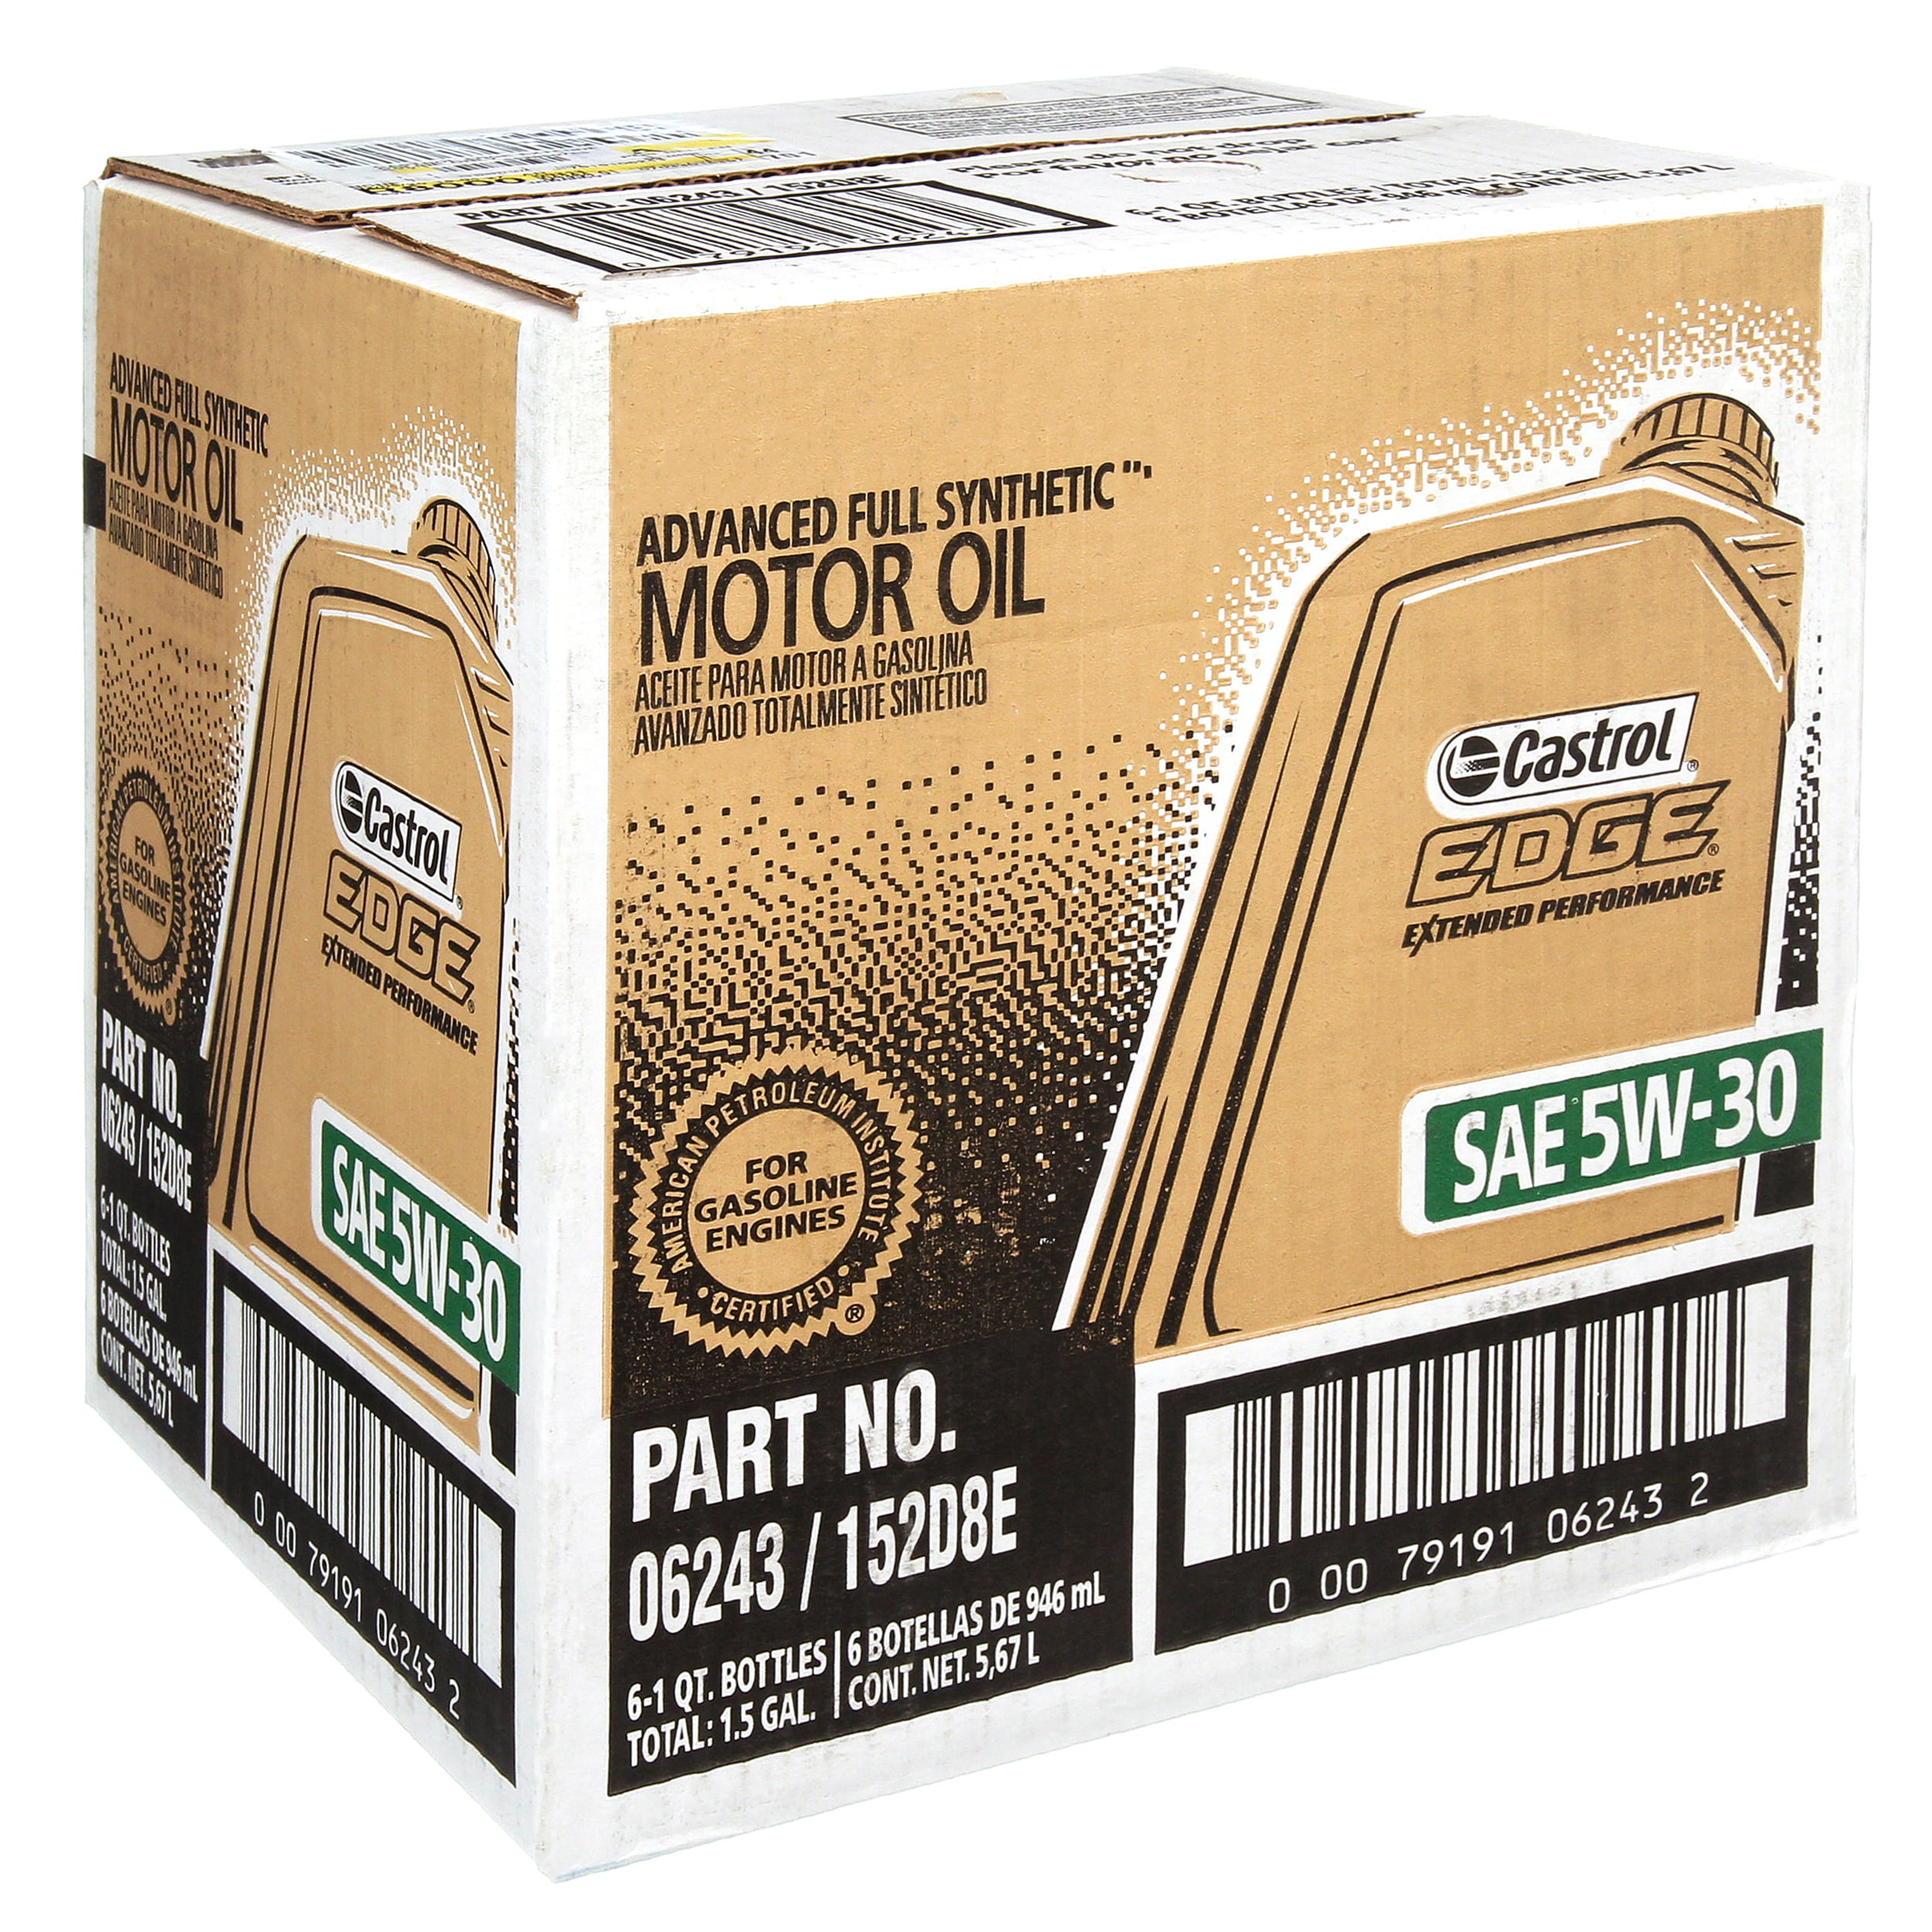 Castrol EDGE Extended Performance 5W-30 Advanced Full Synthetic Motor Oil,  5 Quarts